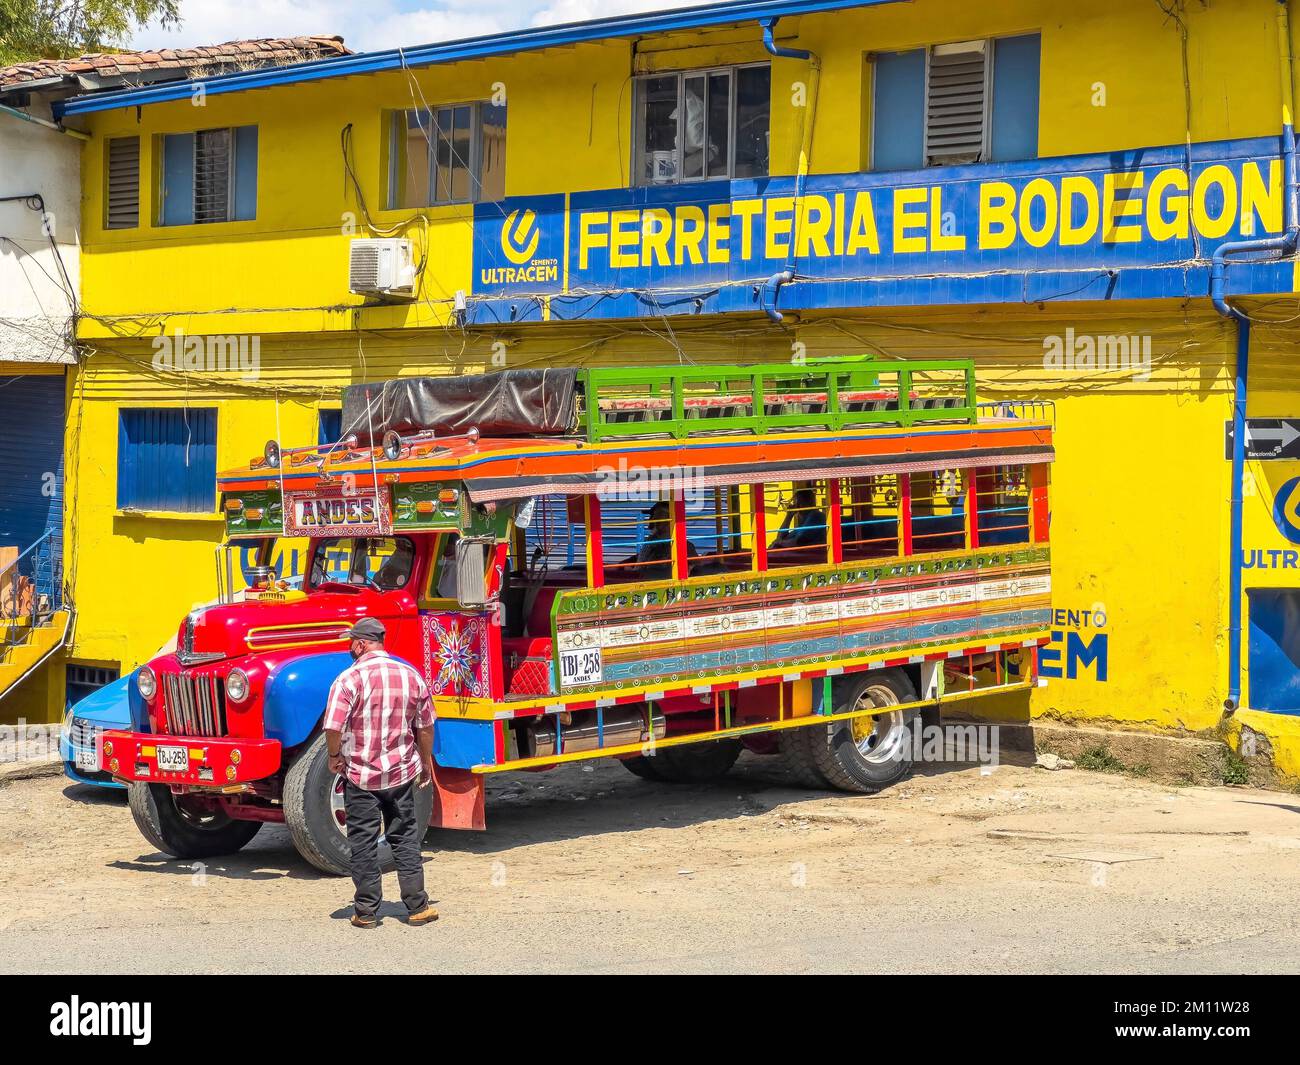 South America, Colombia, Departamento Antioquia, Colombian Andes, Andes, Typical 'Chiva' Bus in the Andes Village Stock Photo